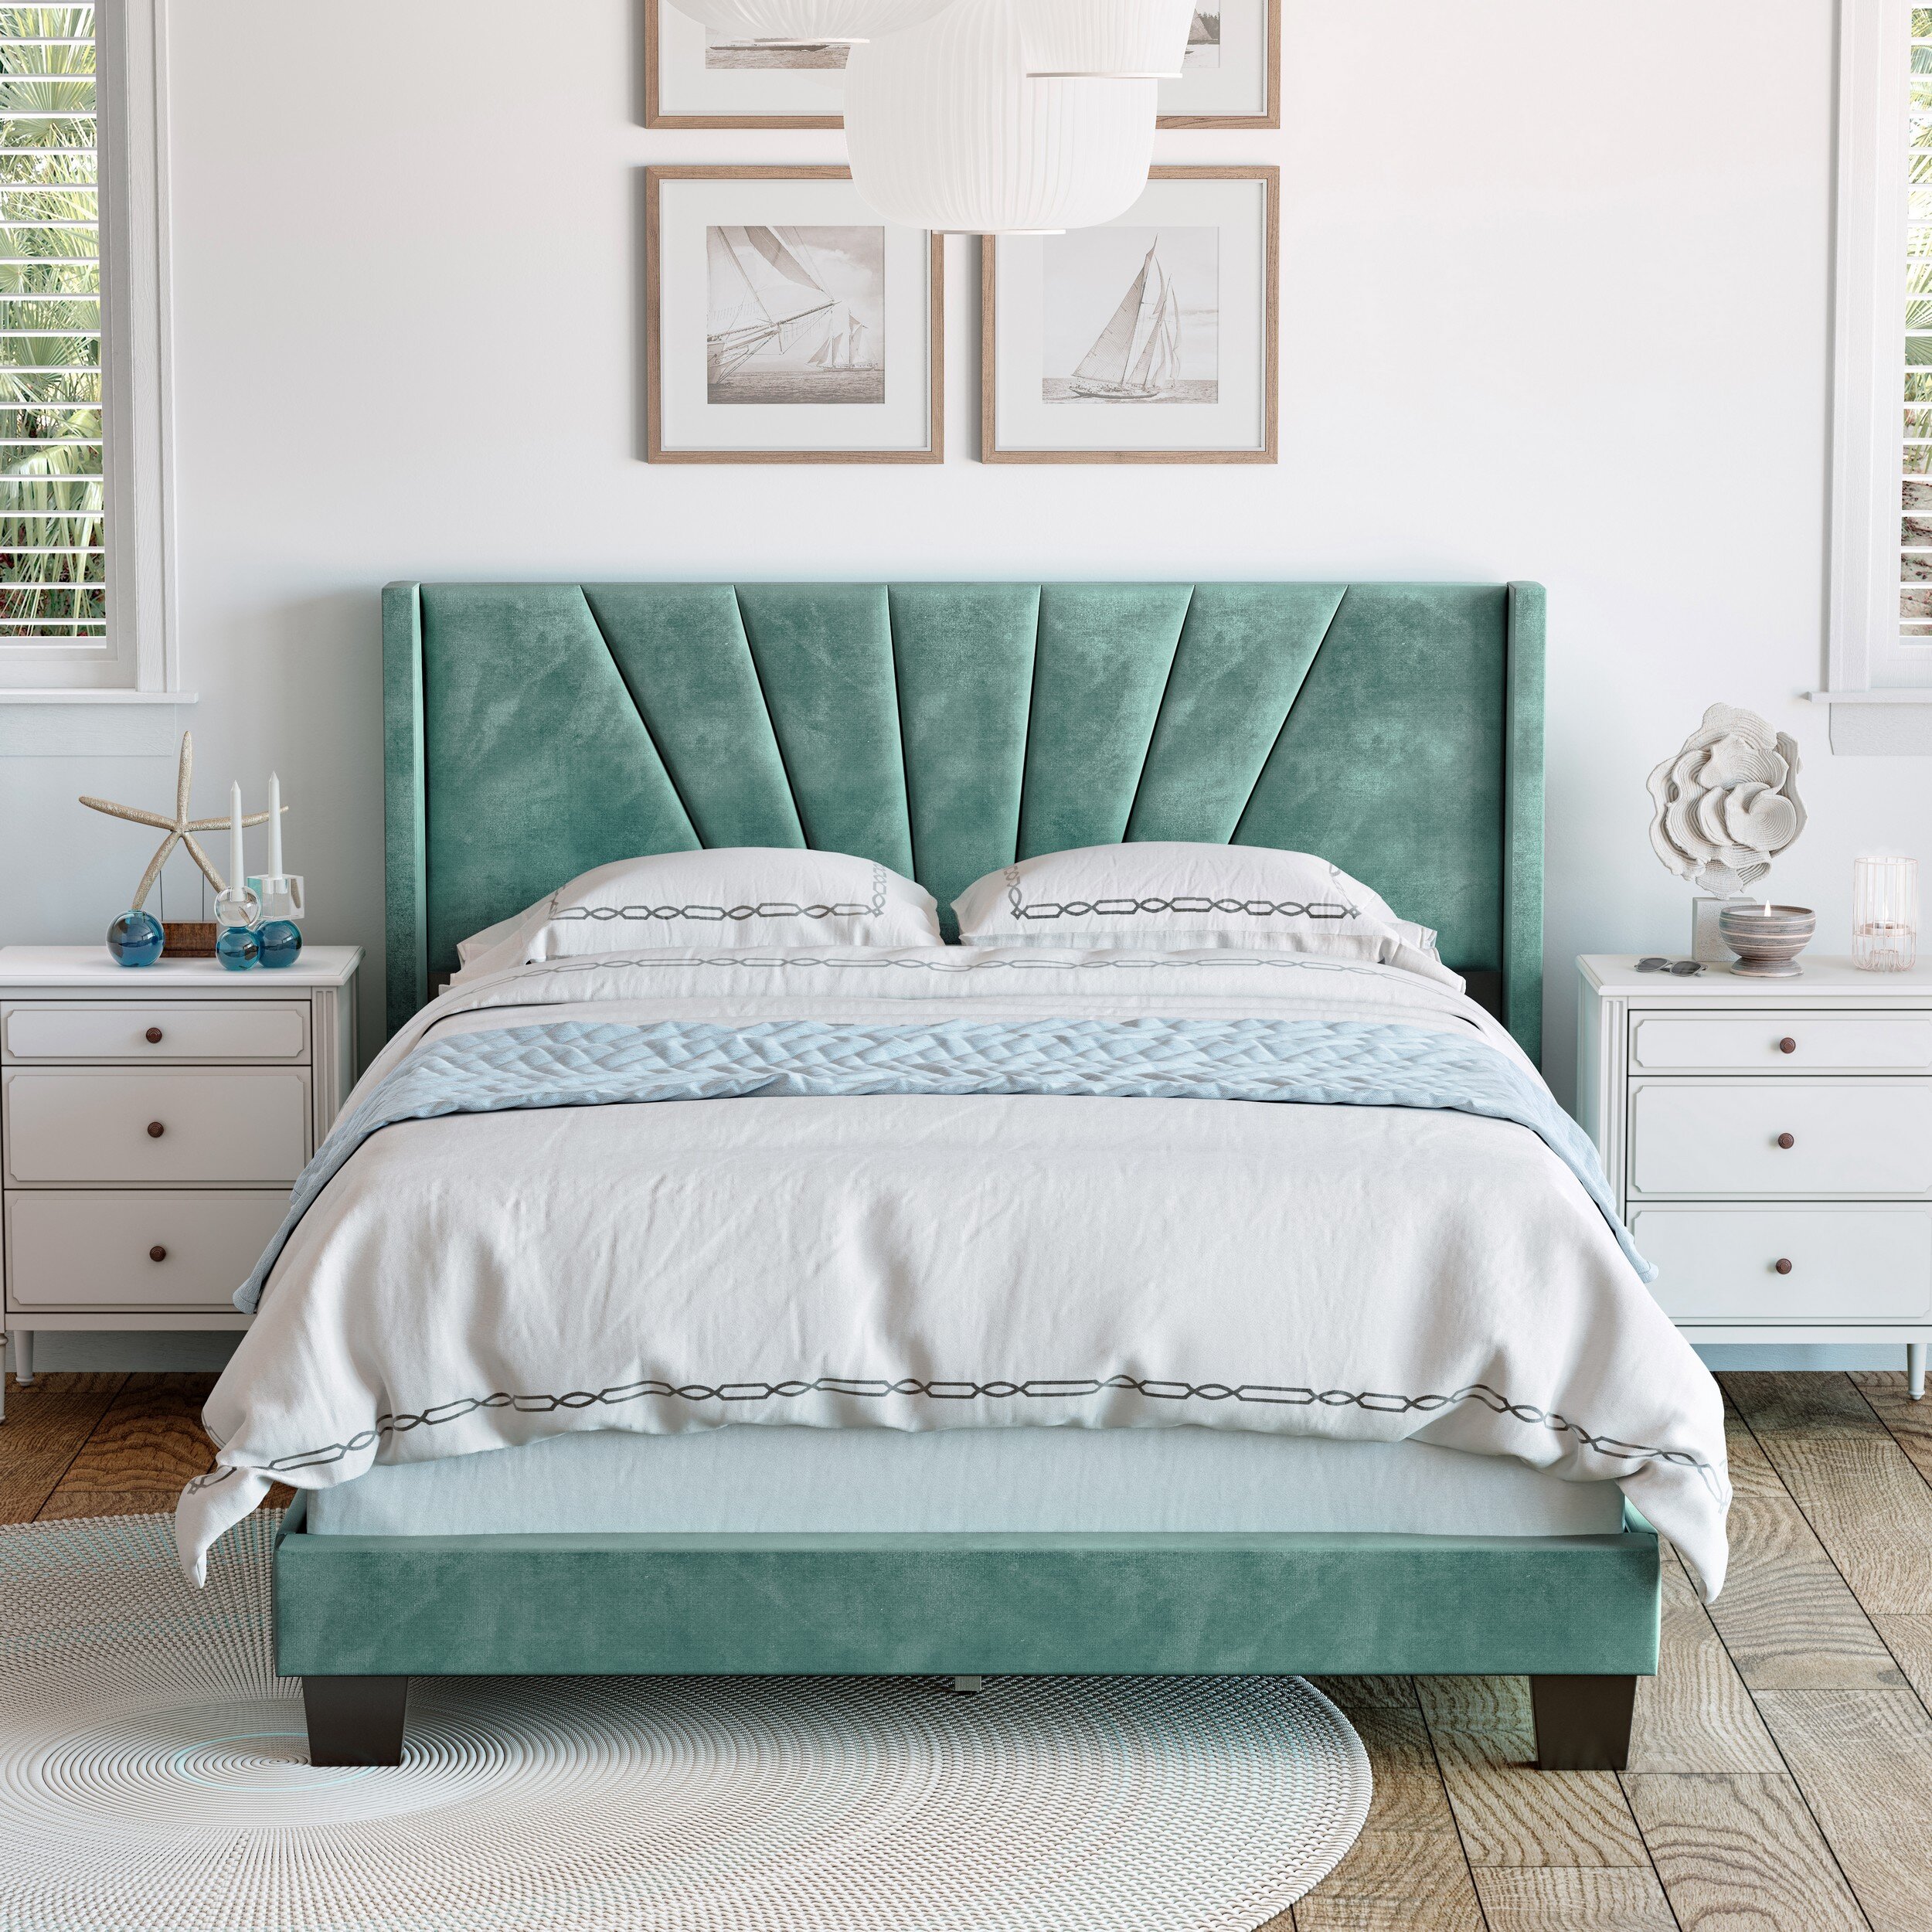 The headboard stitching evokes the rays of the sun or the lines in a seashe...